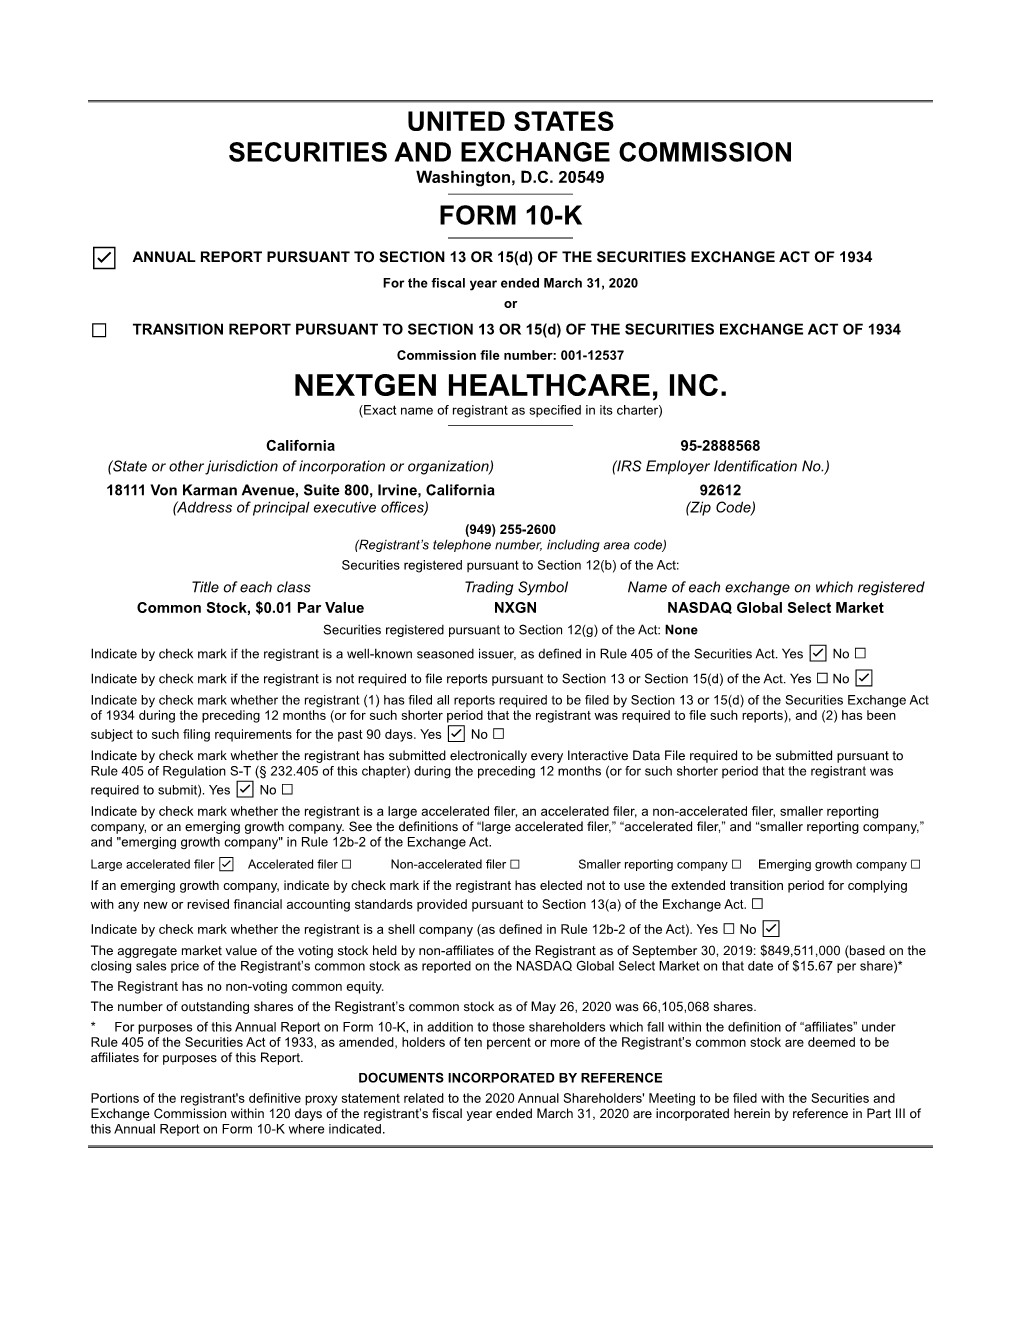 NEXTGEN HEALTHCARE, INC. (Exact Name of Registrant As Specified in Its Charter)